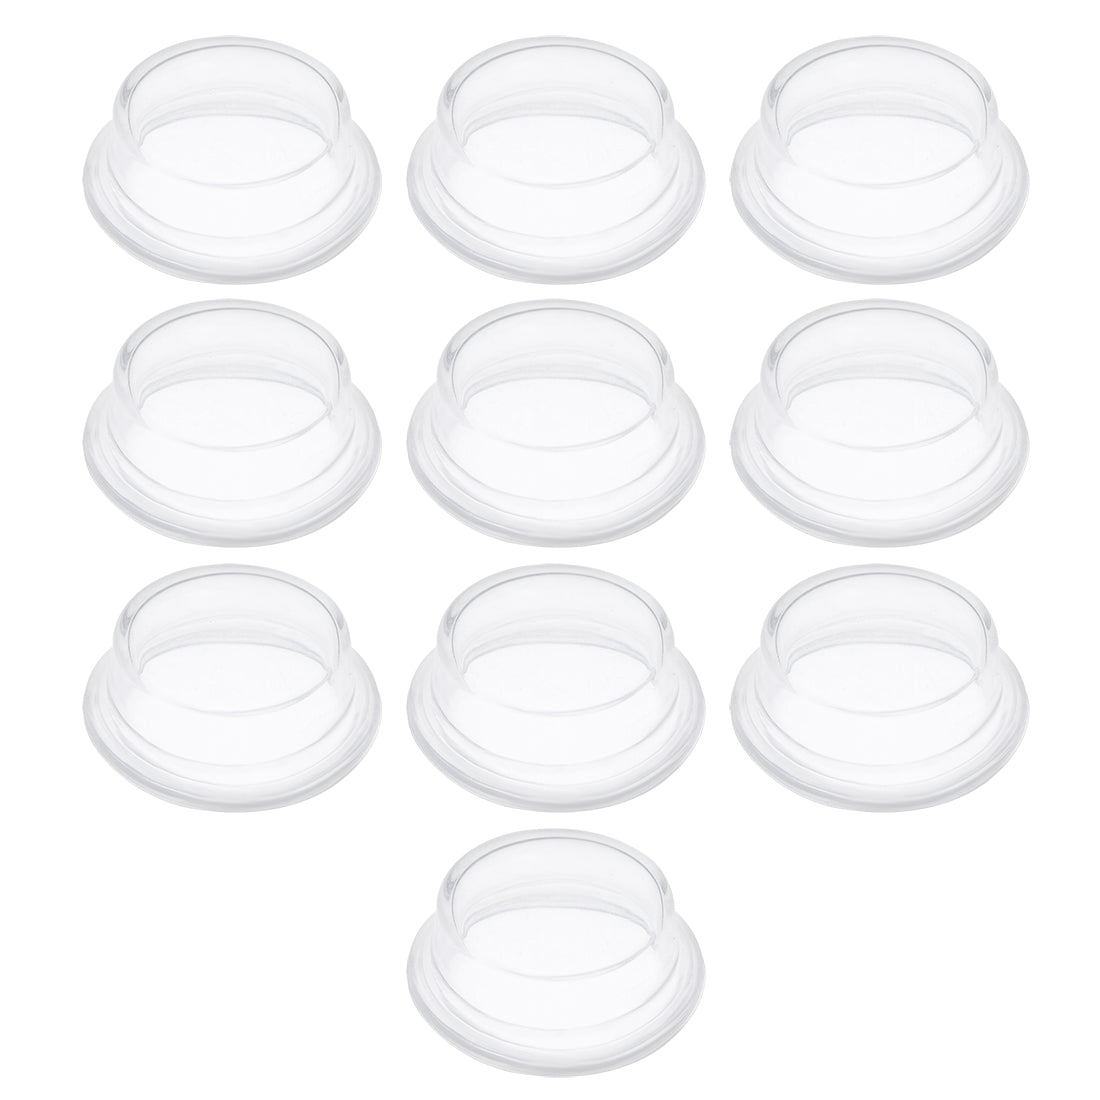 uxcell Uxcell 10pcs Waterproof Case Switch Covers Caps Protector Clear Silicone Round for Boat Rocker Switch